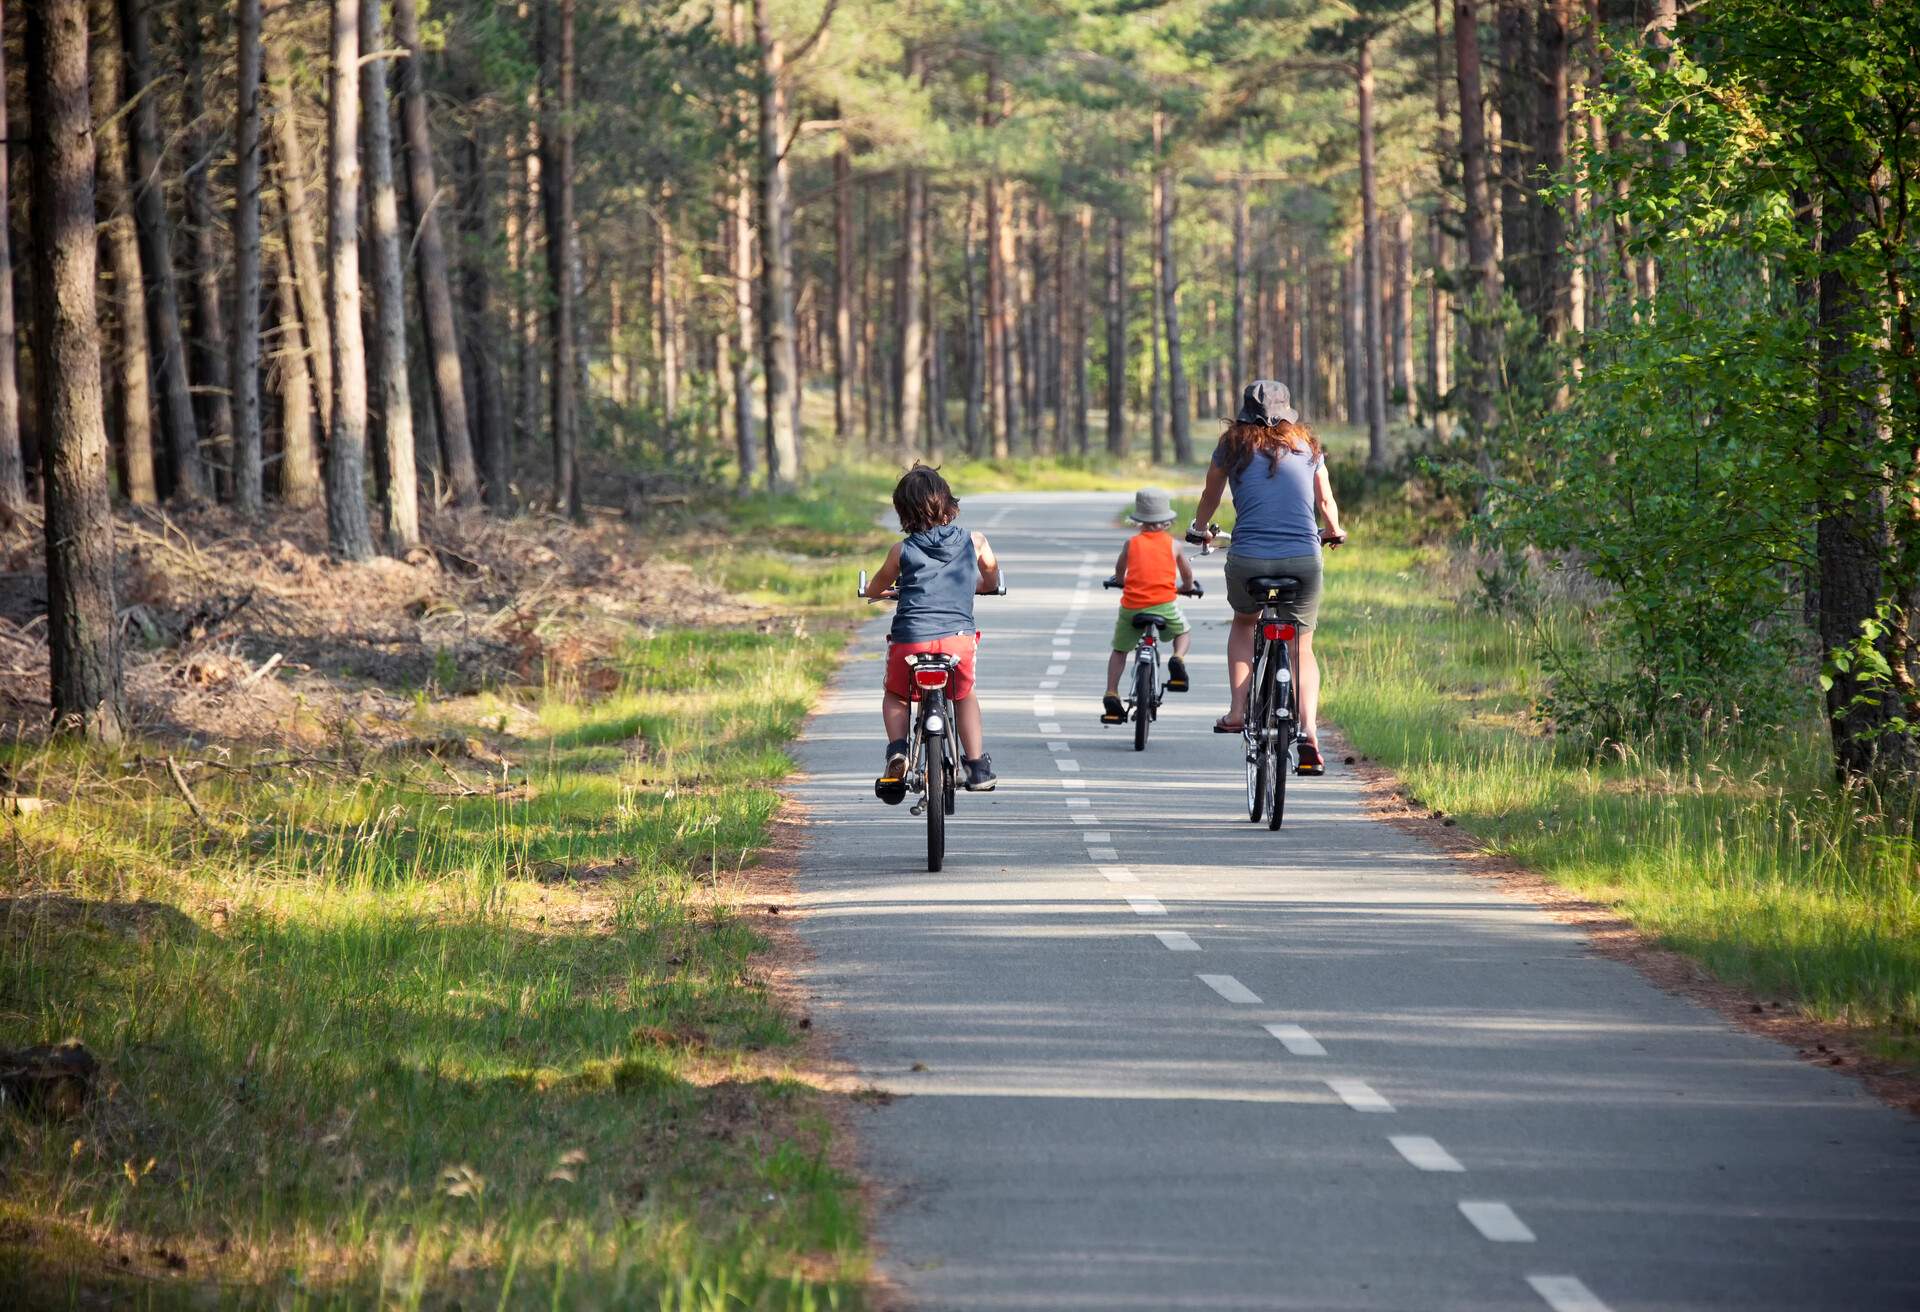 DEST_DENMARK_SKAGEN_THEME_PEOPLE_KIDS_CYCLING_COUNTRYSIDE_GettyImages-597638037